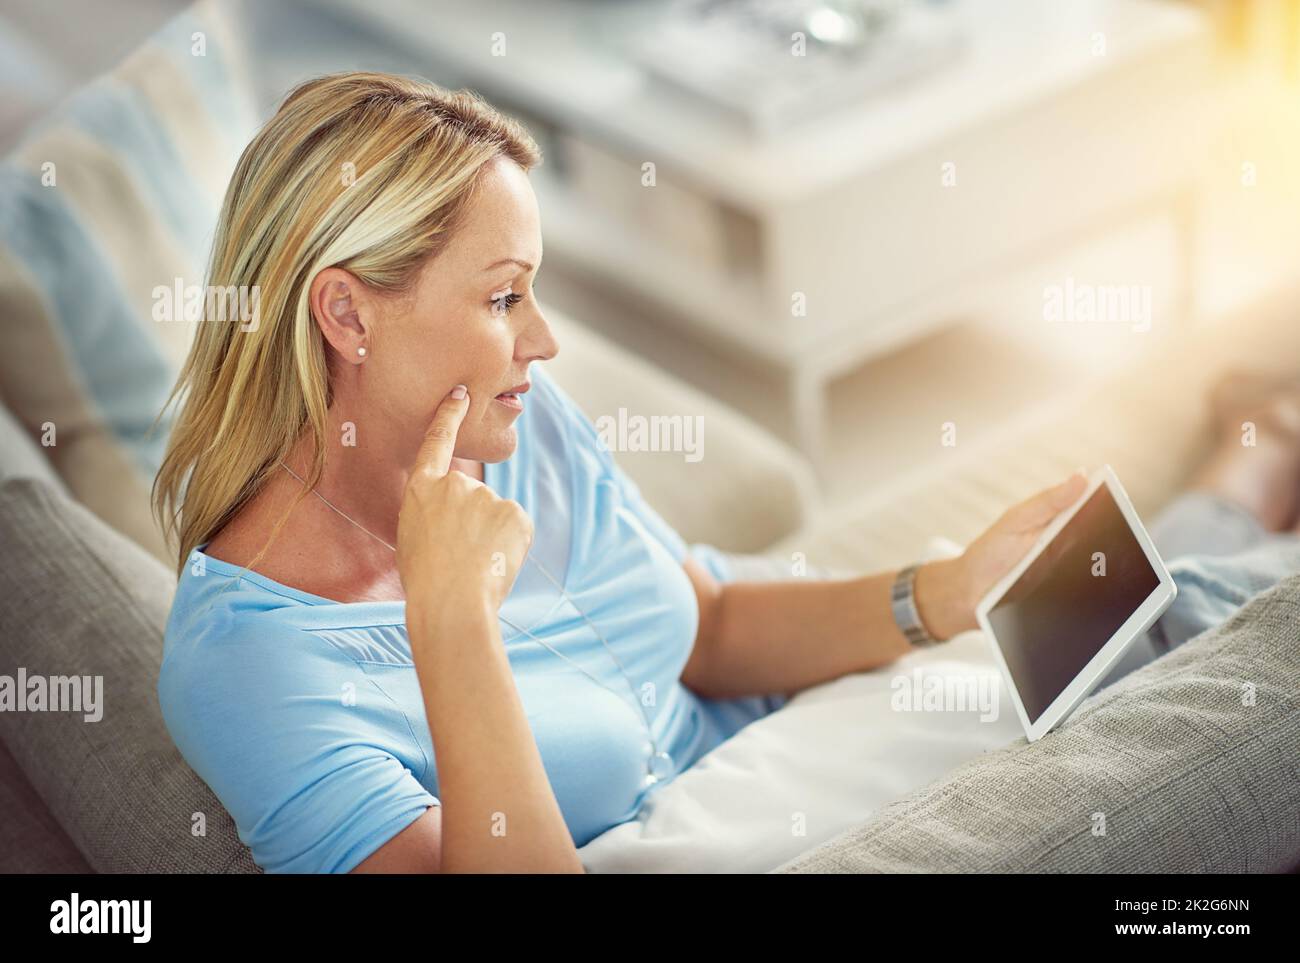 Timeout with her tablet. Shot of a mature woman relaxing on the sofa with a digital tablet. Stock Photo